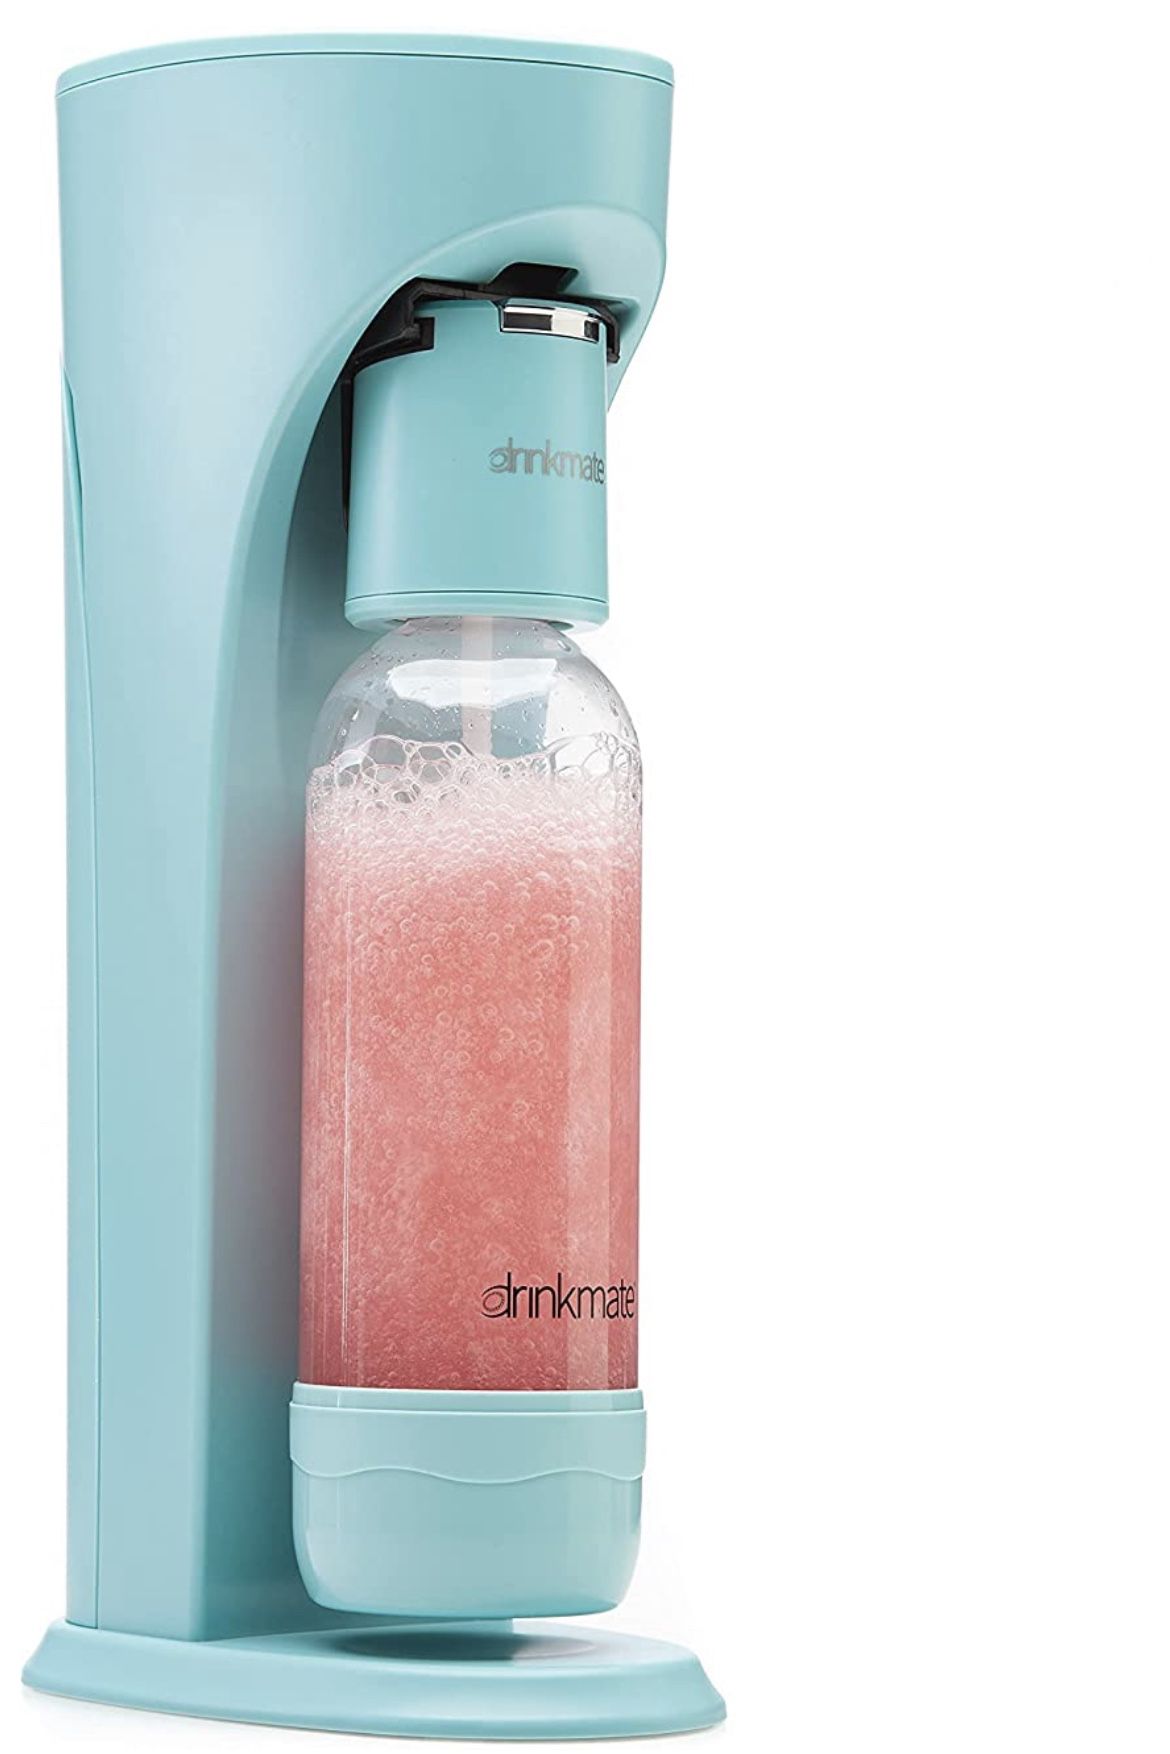 DrinkMate OmniFizz Sparkling Water and Soda Maker, Carbonates Any Drink 176